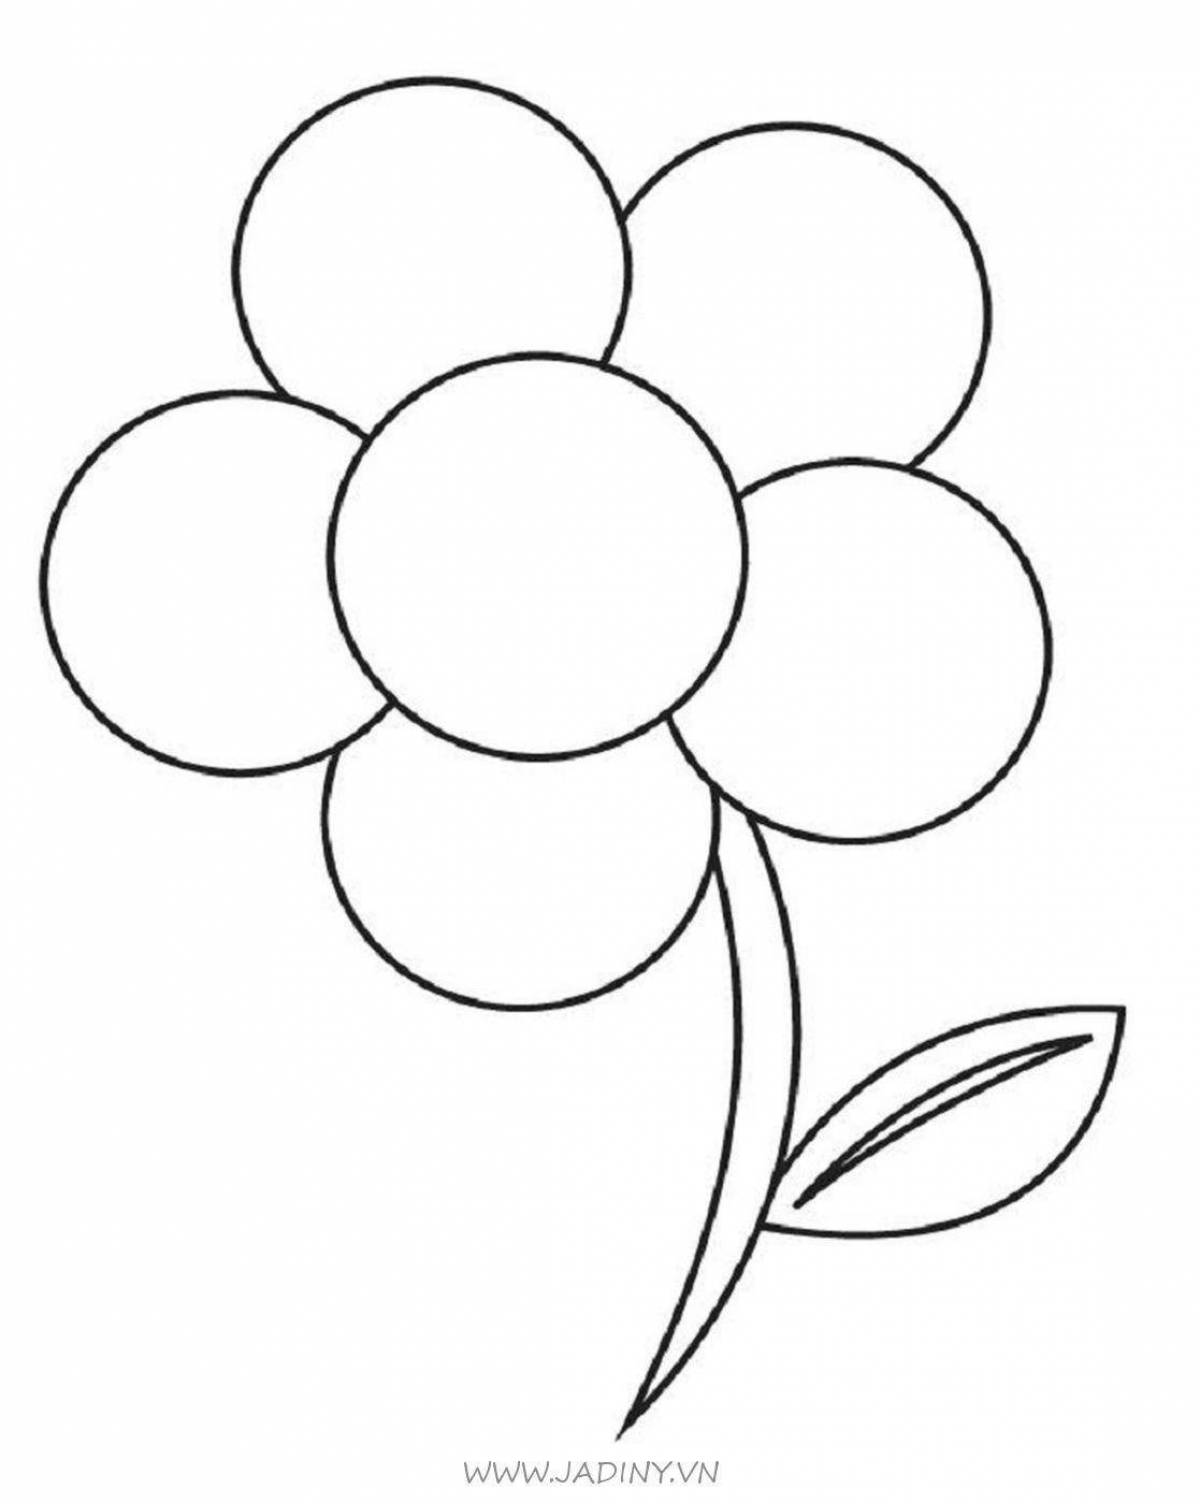 Great coloring flower picture for kids